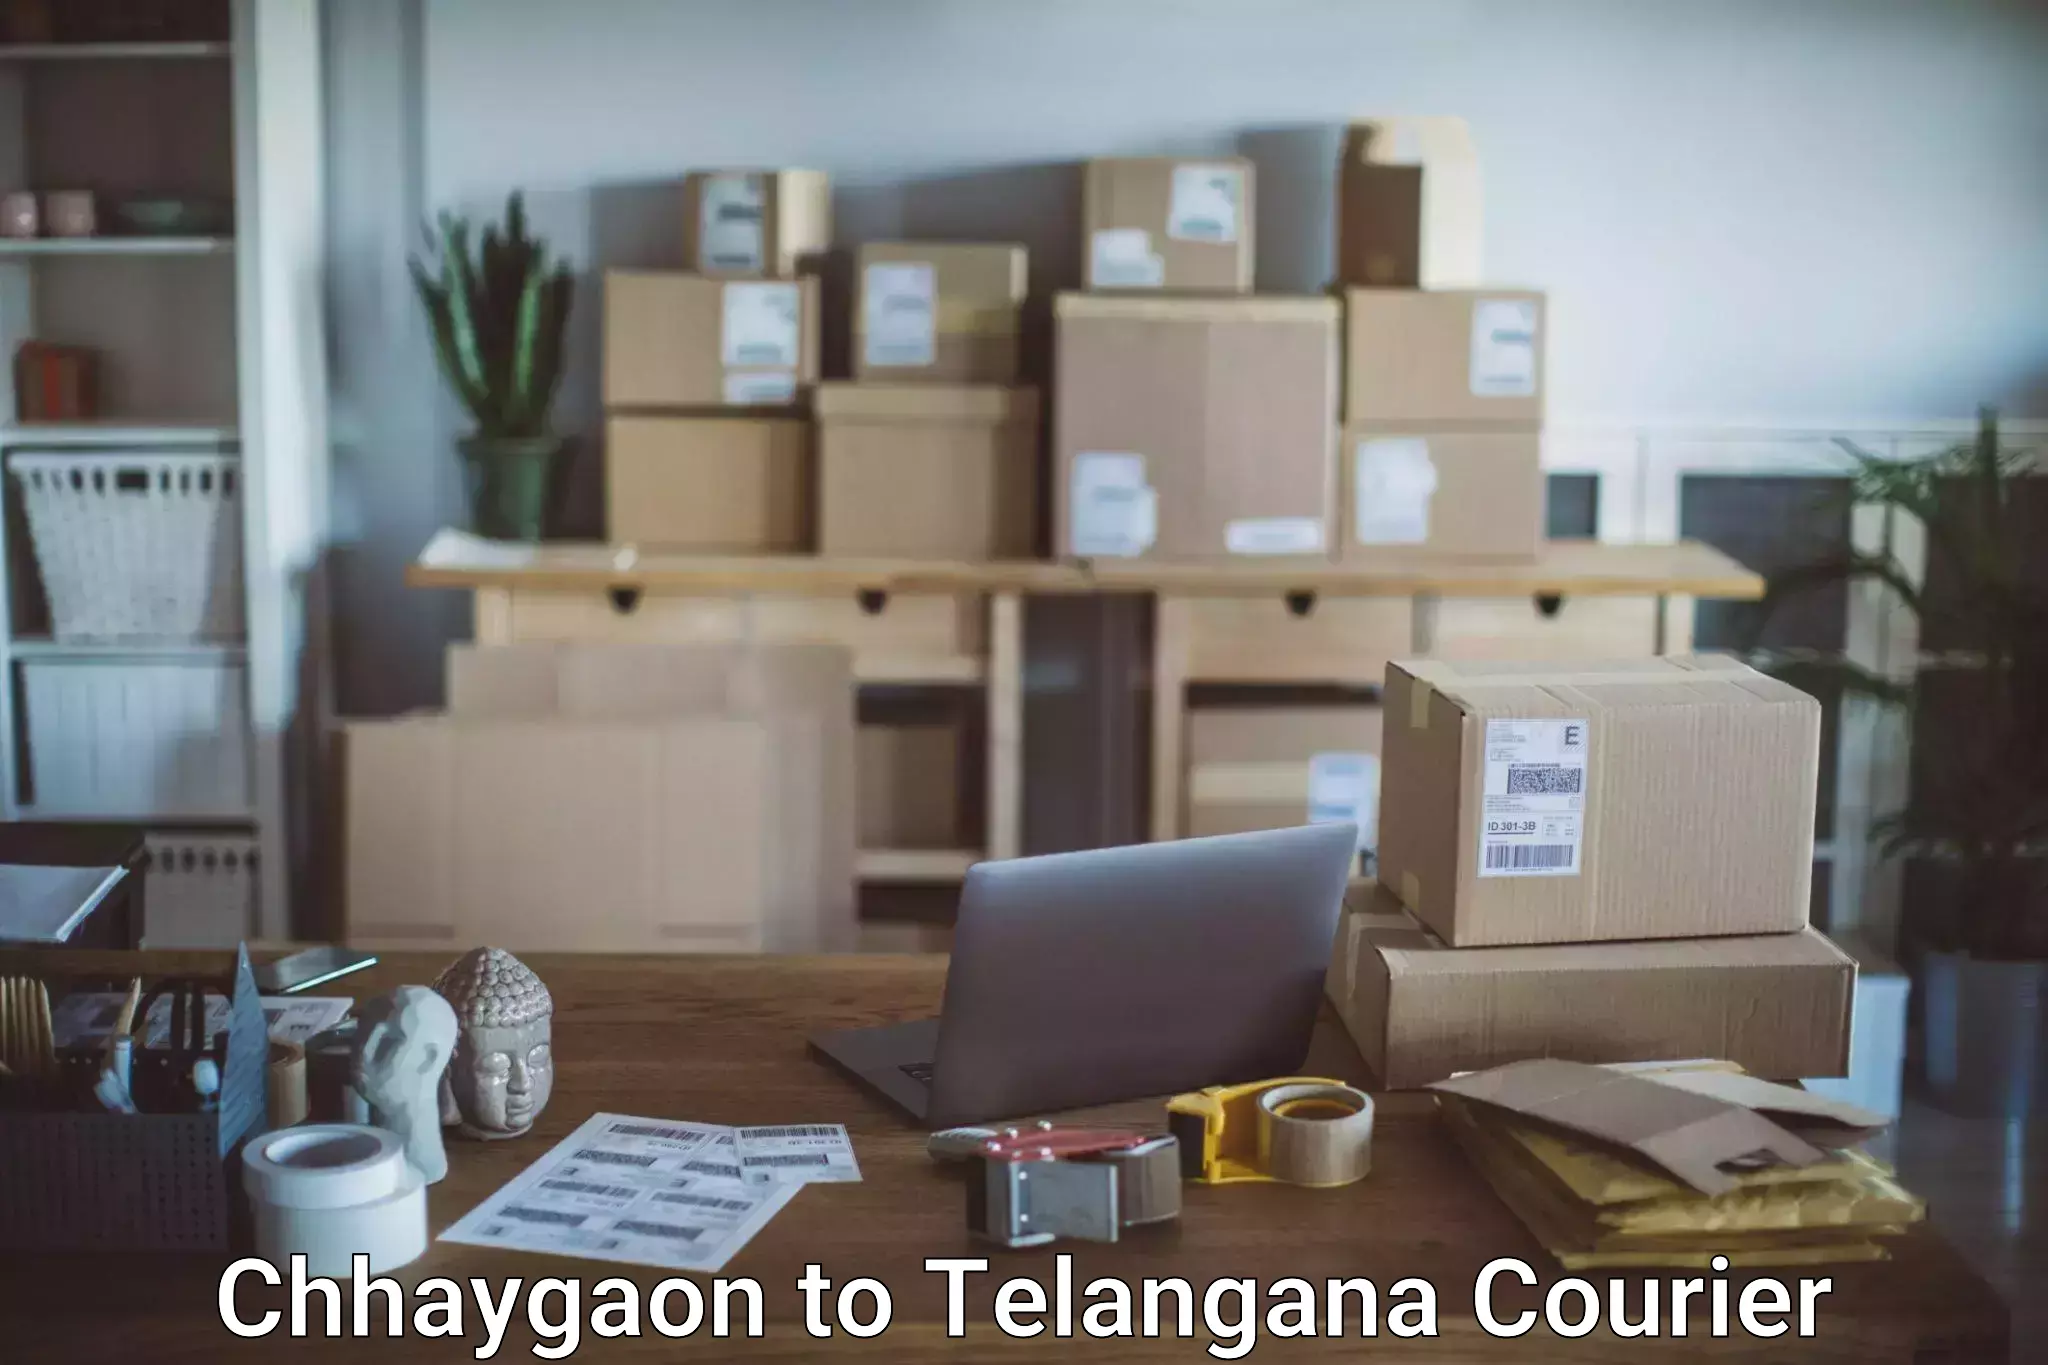 Hassle-free luggage shipping Chhaygaon to Hyderabad